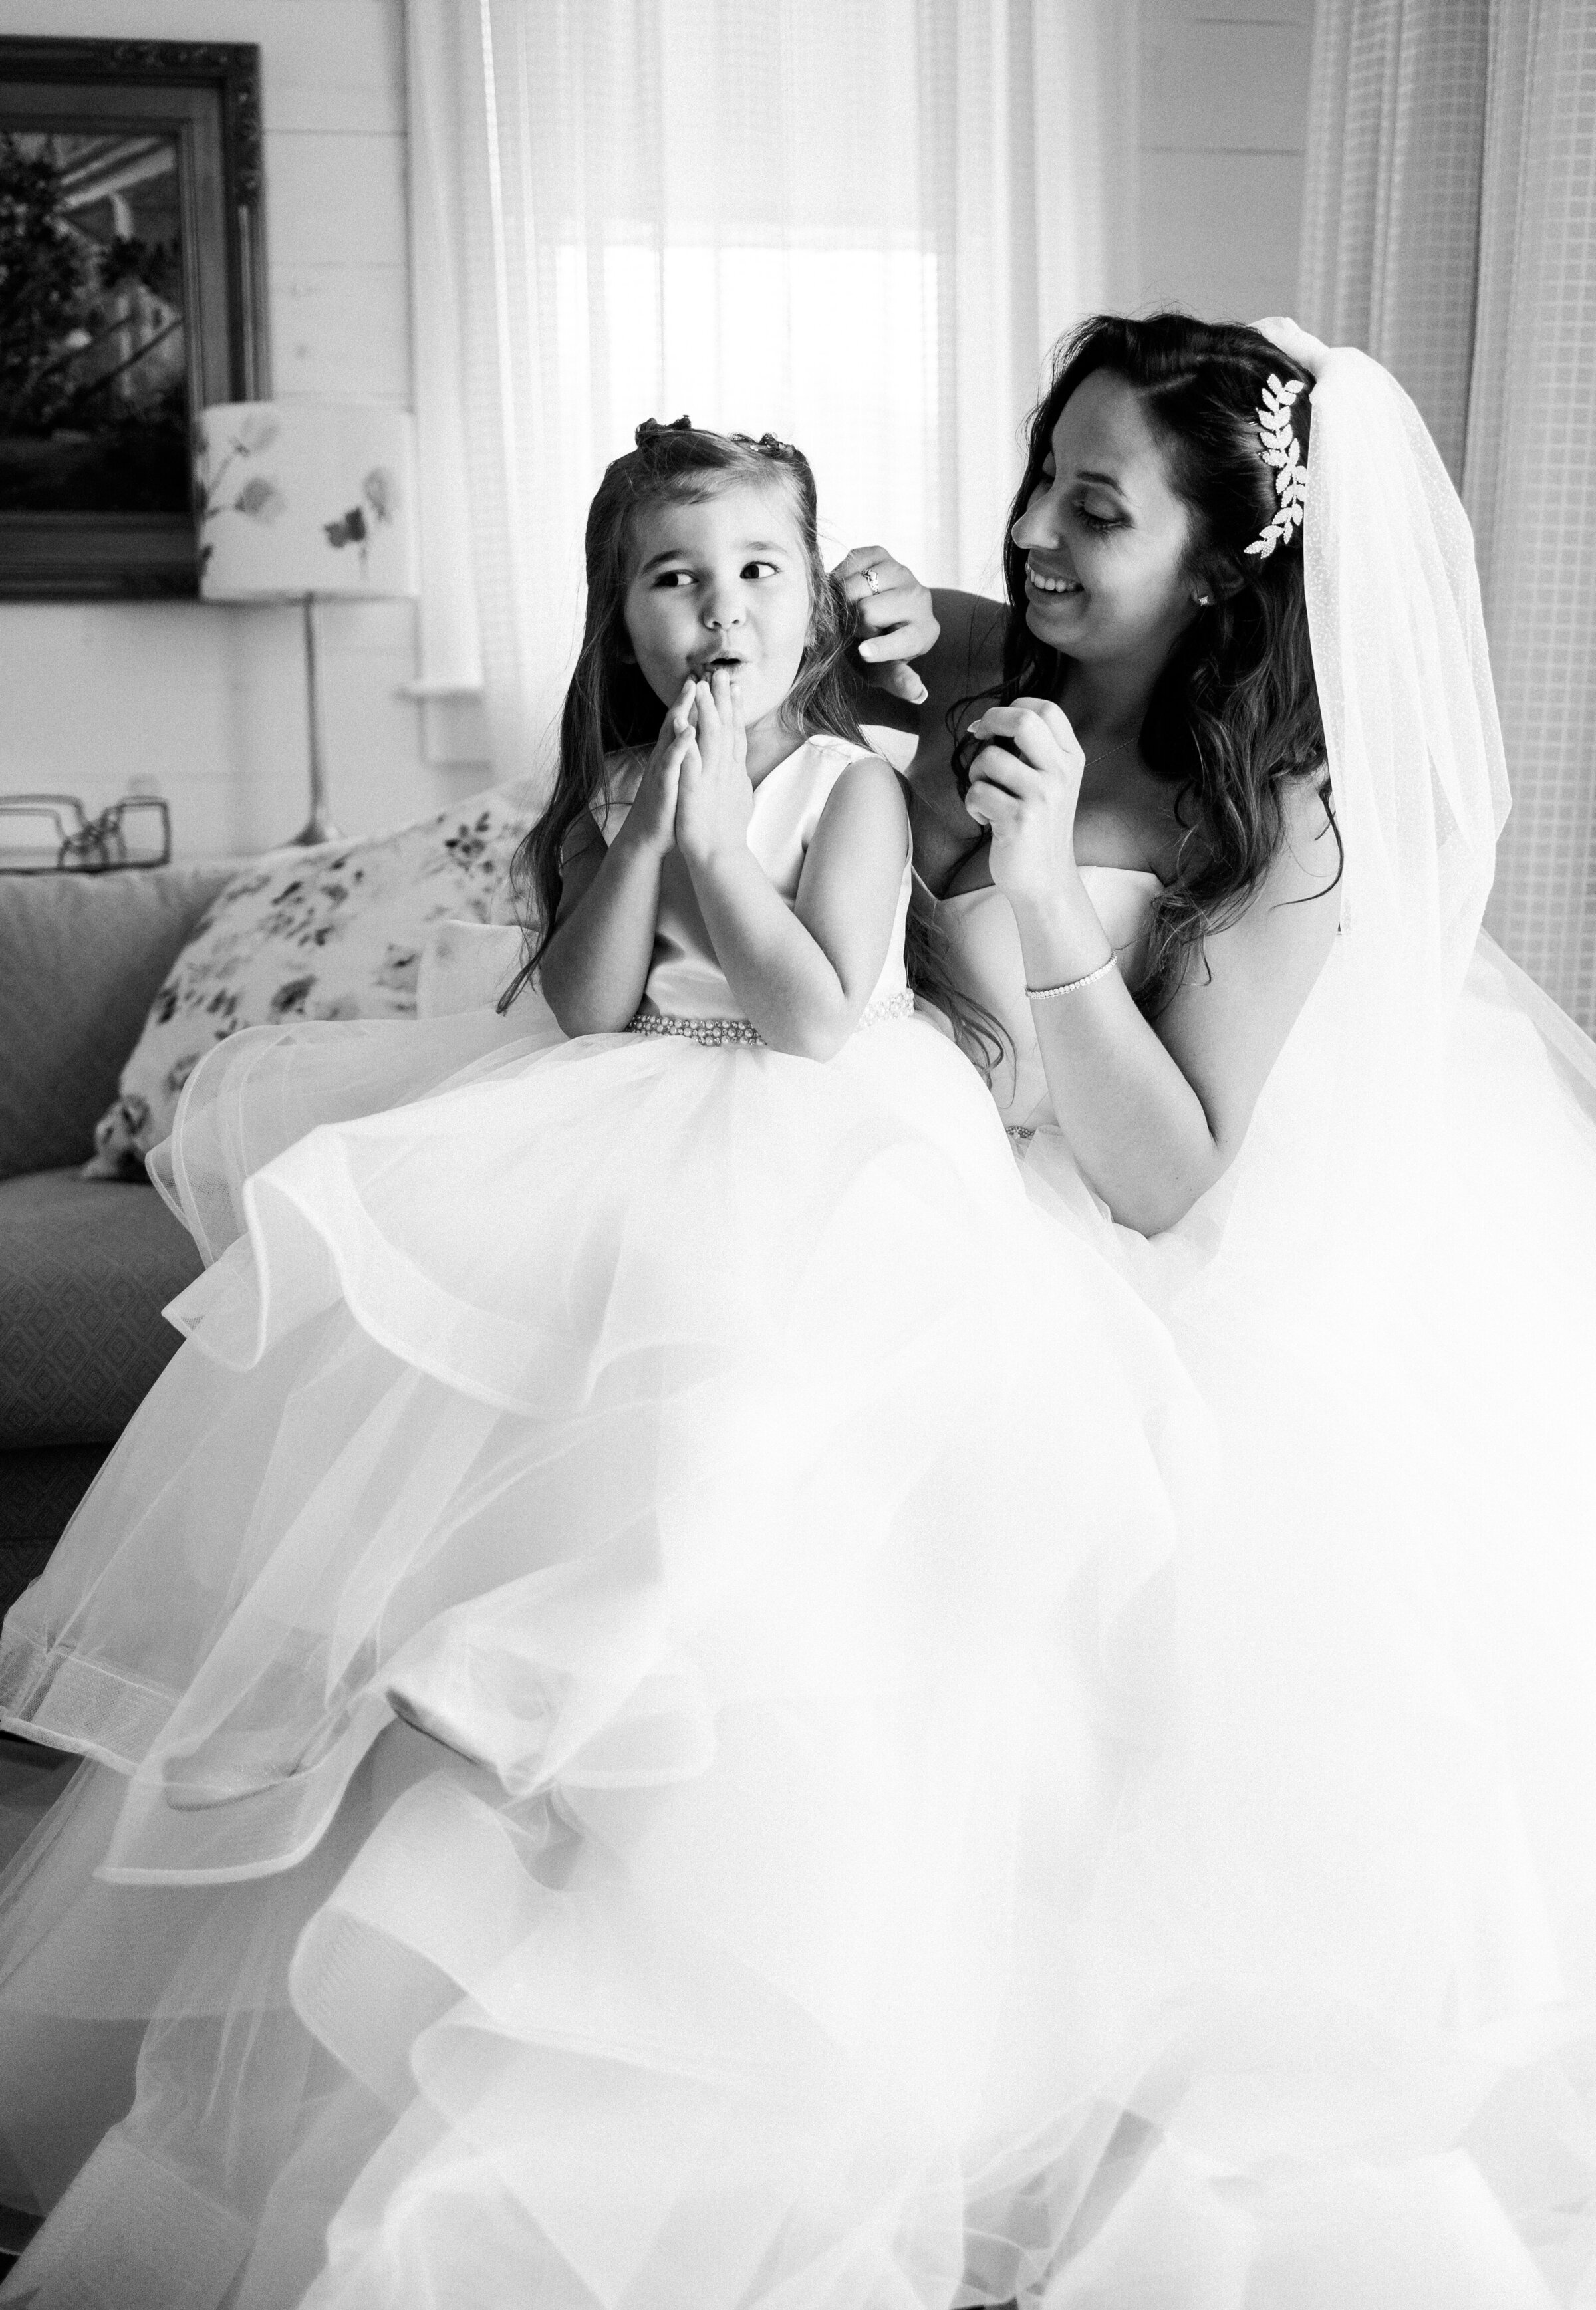 During getting ready, bride puts earrings on her young daughter at The Preserve at Chocura in Tamworth, NH